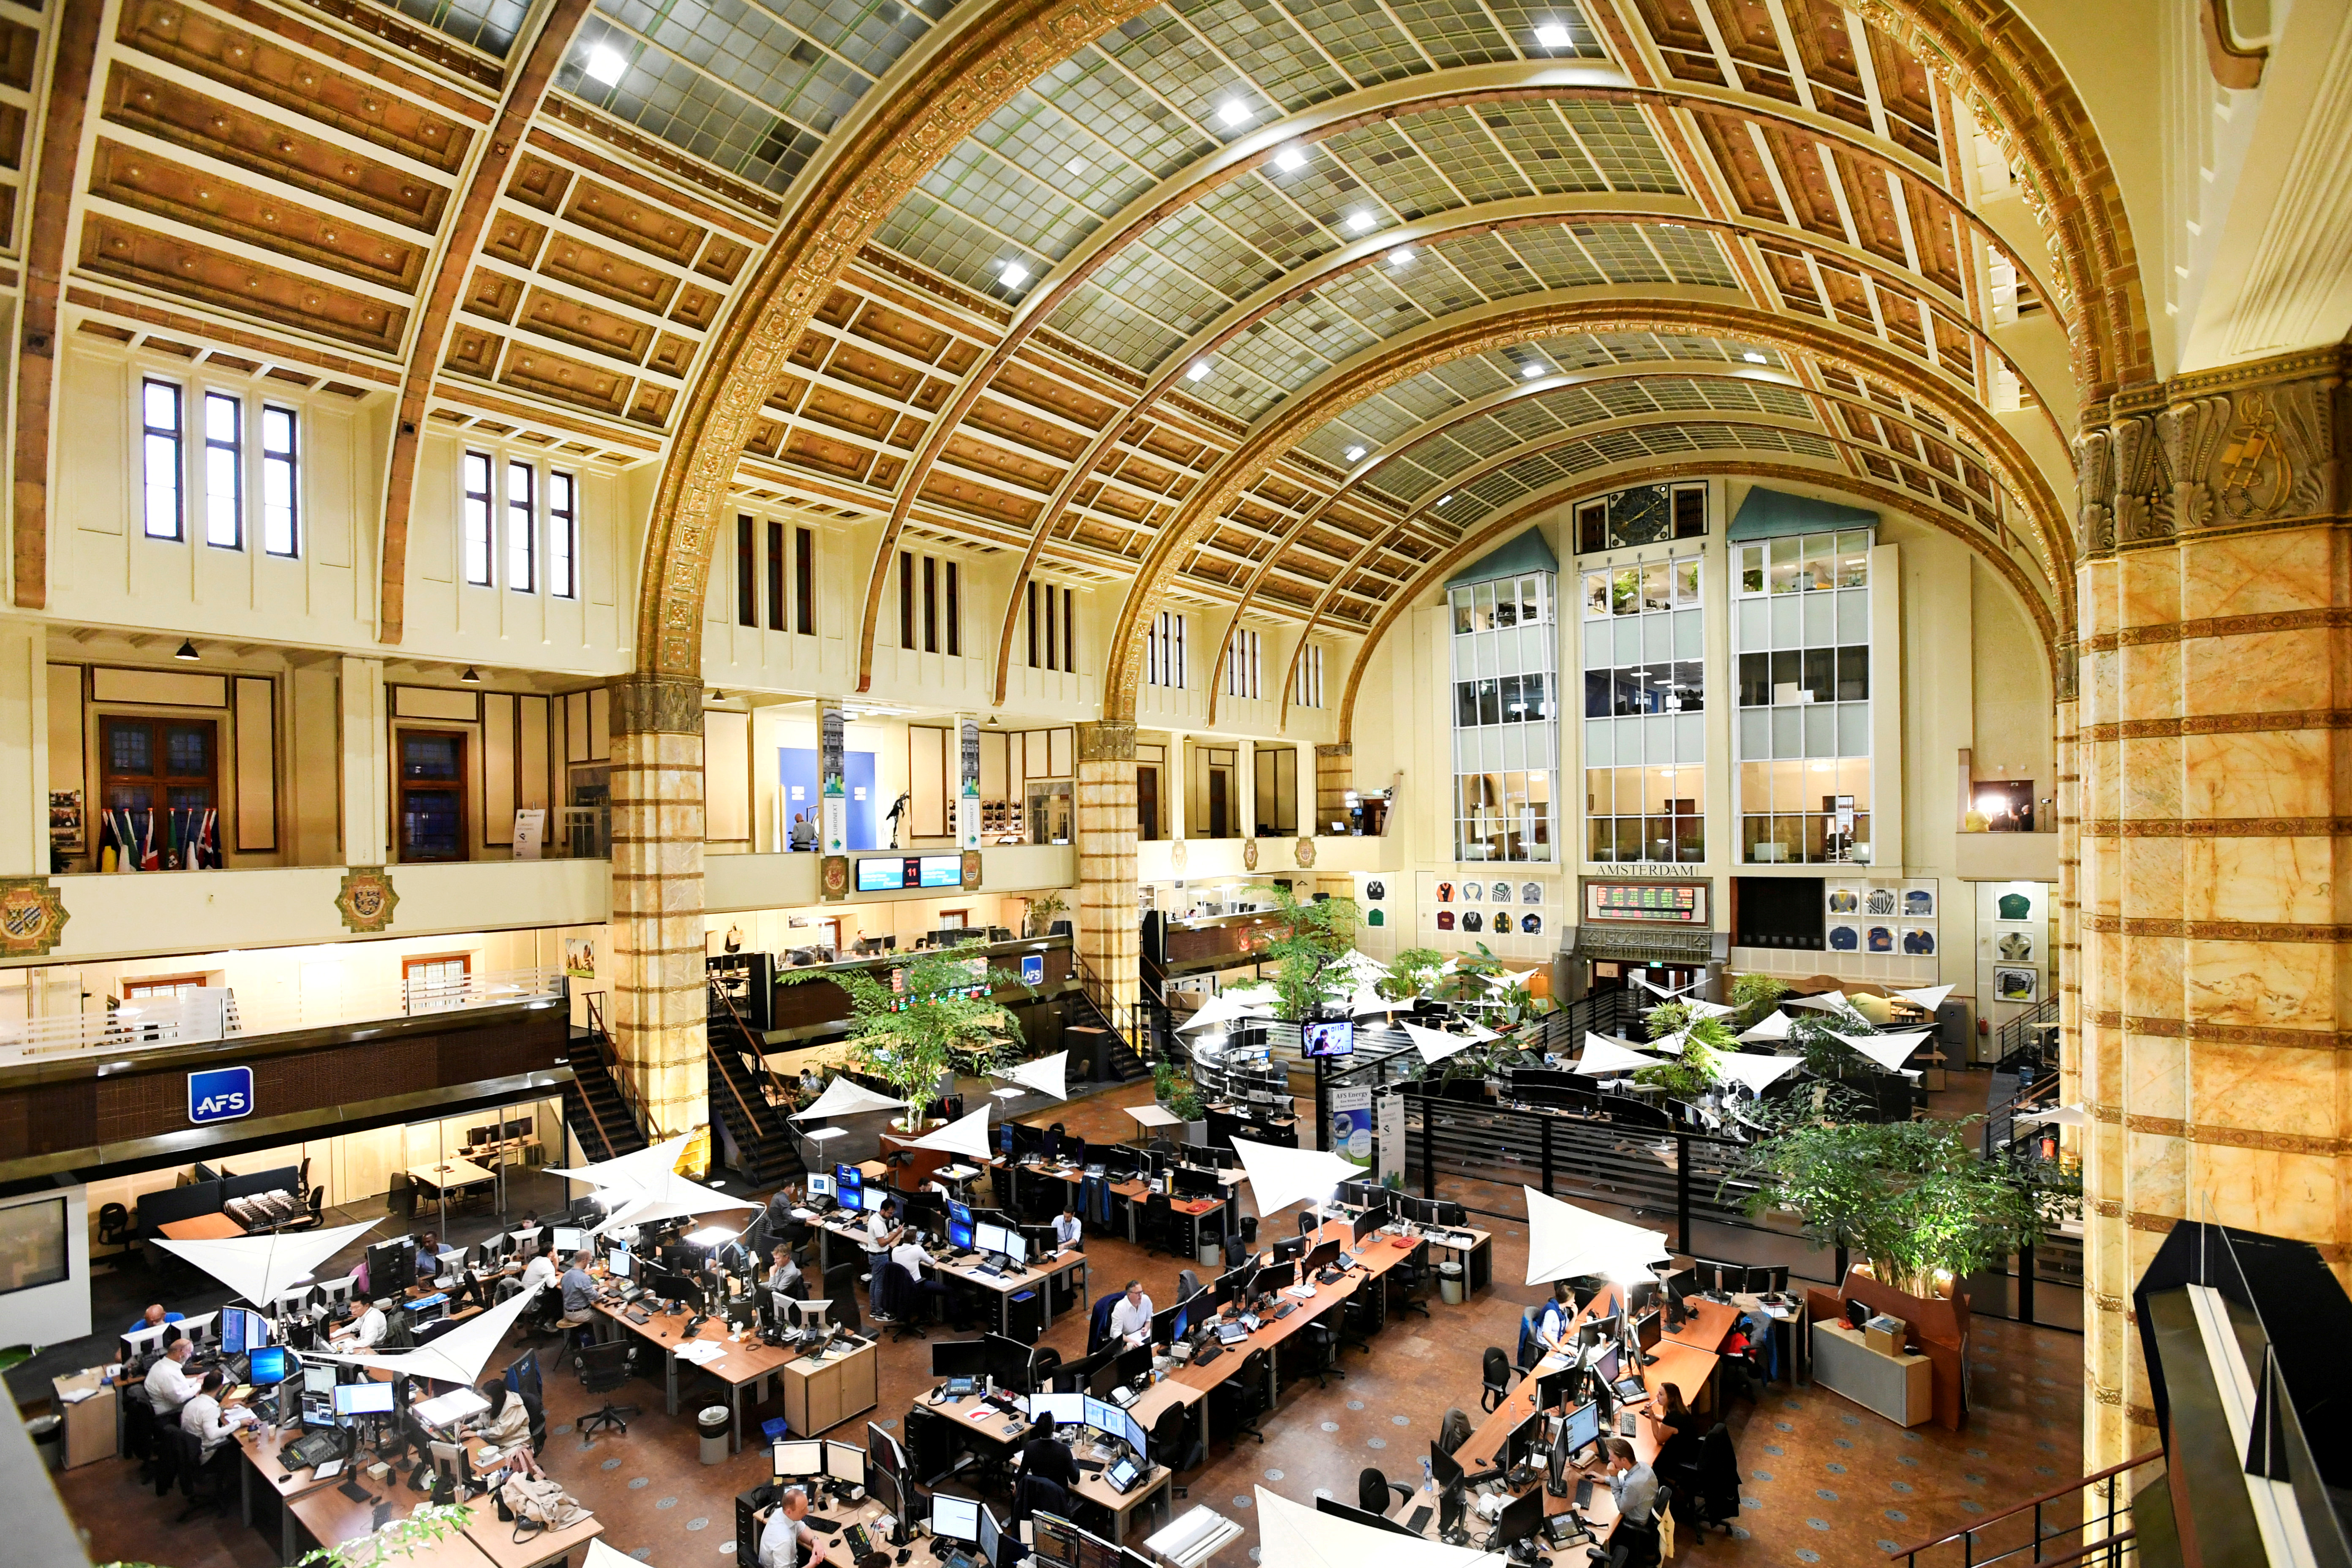 Overview of Amsterdam's stock exchange interior as Prosus begins trading on the Euronext stock exchange in Amsterdam